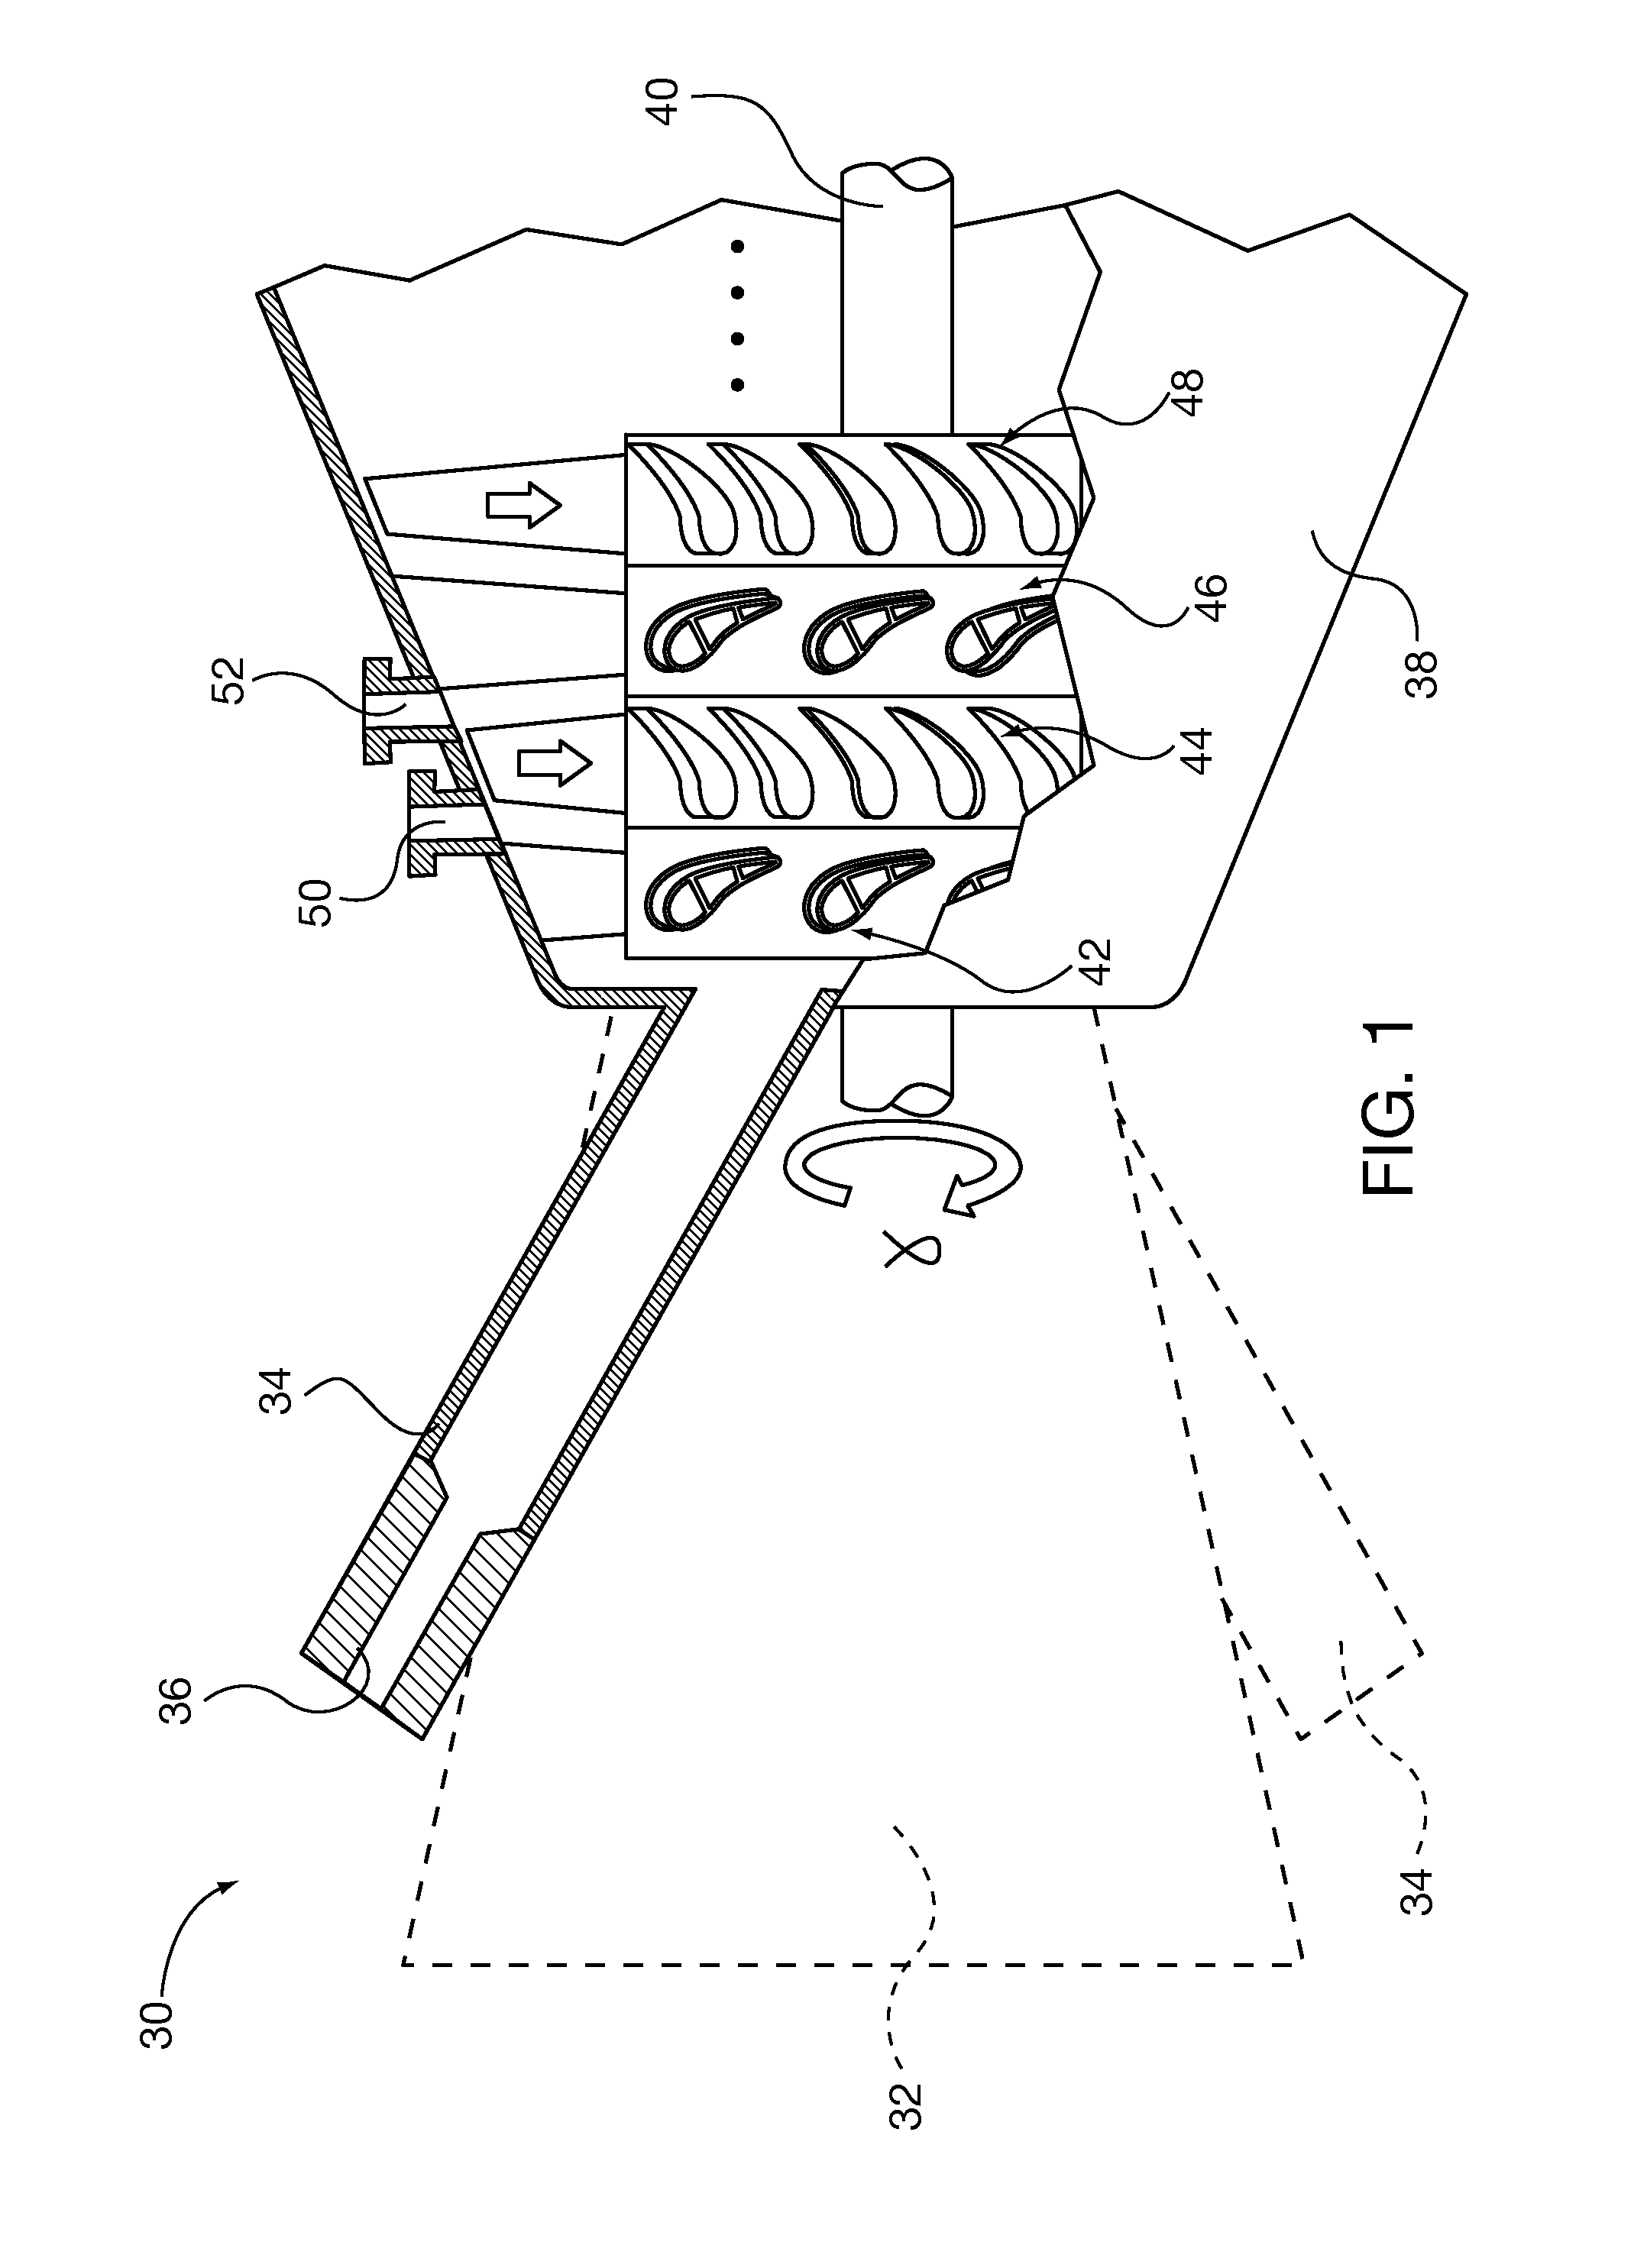 System and method for automated optical inspection of industrial gas turbines and other power generation machinery